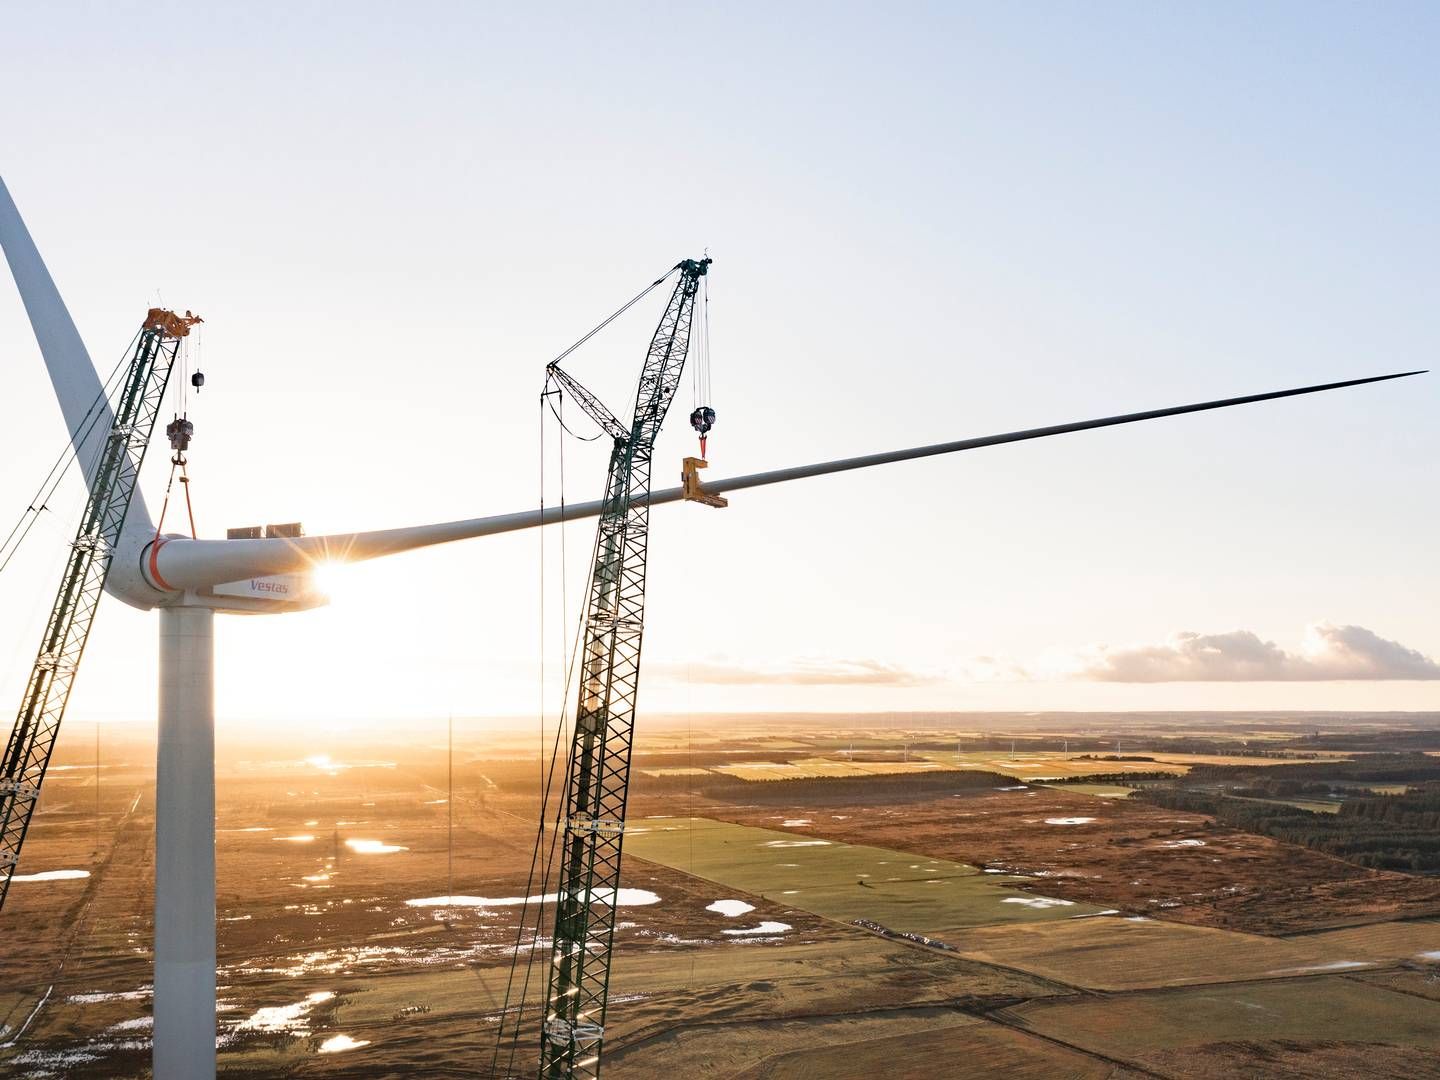 Danish OEM Vestas once again assumes first place as the world's largest wind turbine supplier. | Photo: vestas